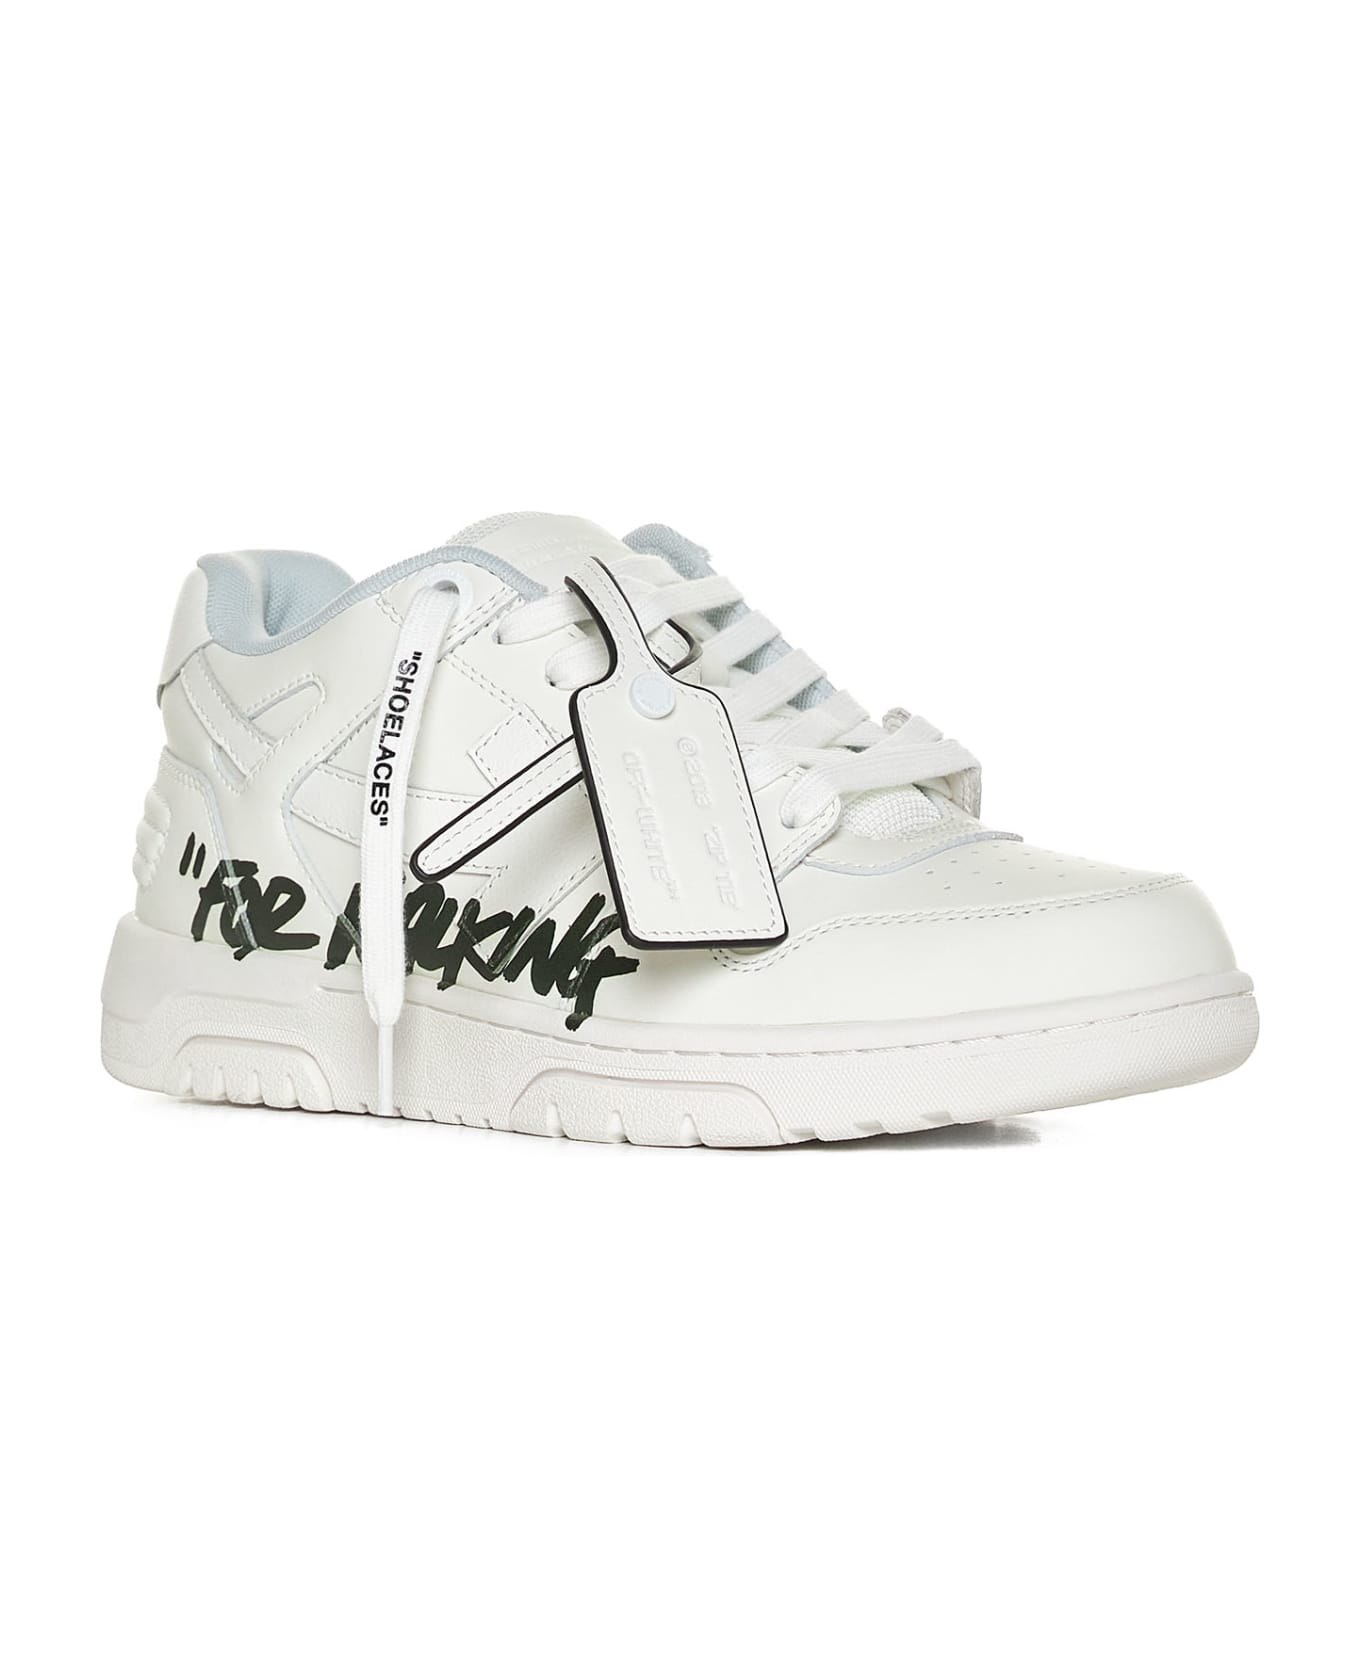 Off-White Out Of Office For Walking Sneakers - White BLACK